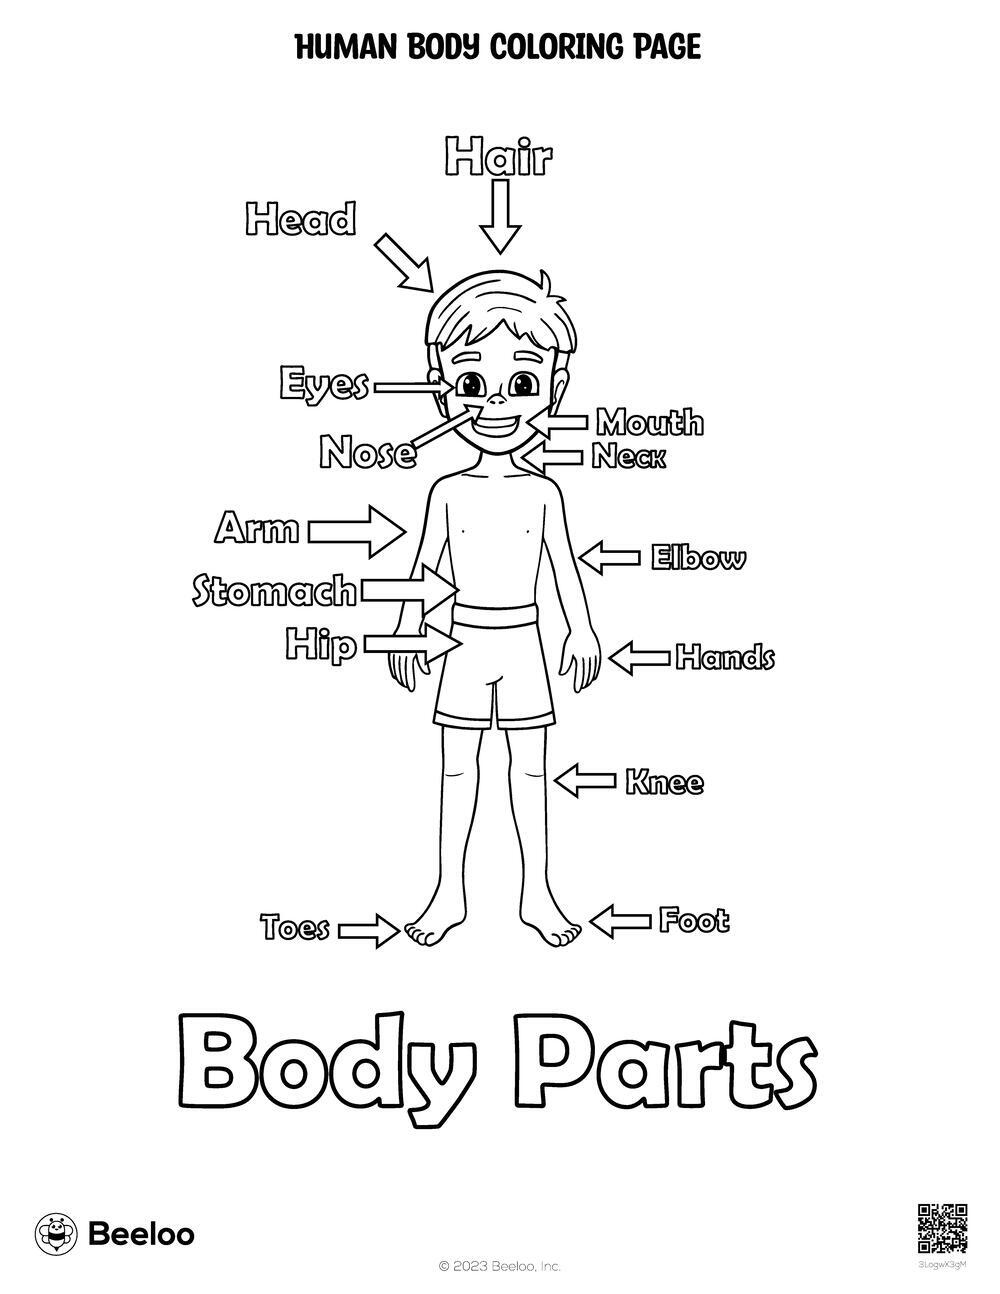 Human Body-Themed Coloring Pages • Beeloo Printable Crafts And with Free Printable Human Anatomy Coloring Pages